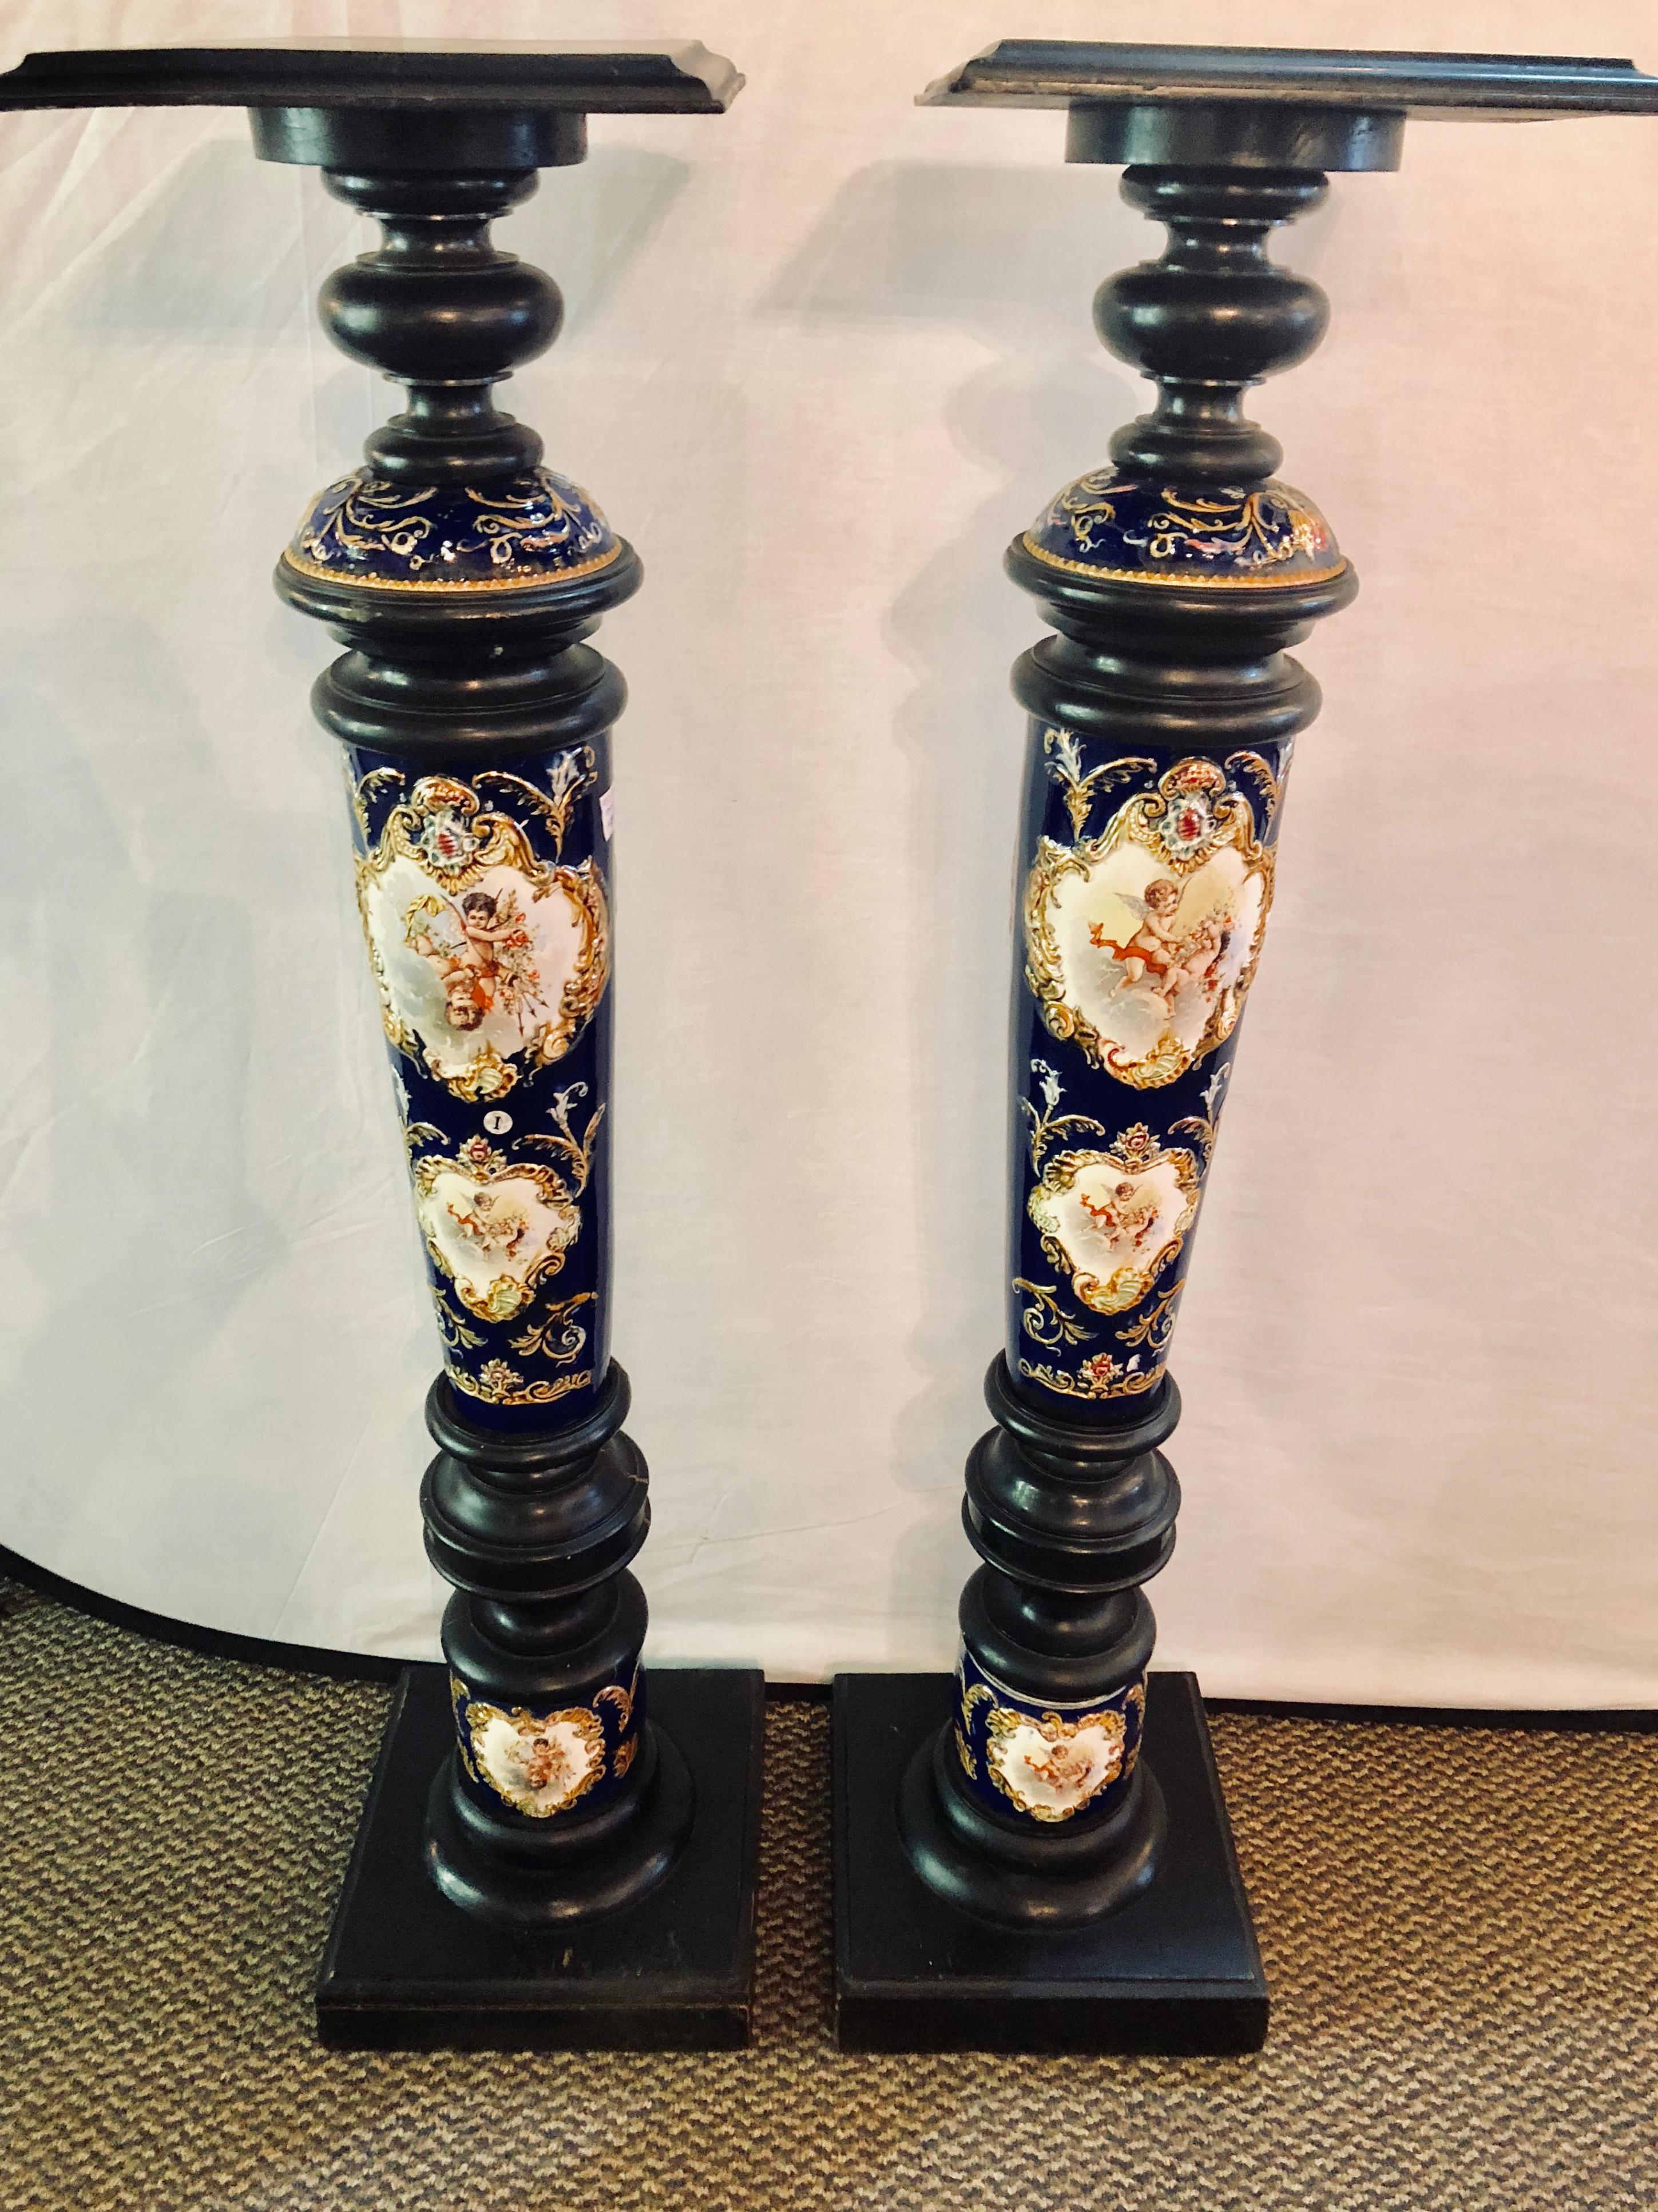 Pair of Royal Vienna Style Porcelain and Ebony Column Pedestals 1